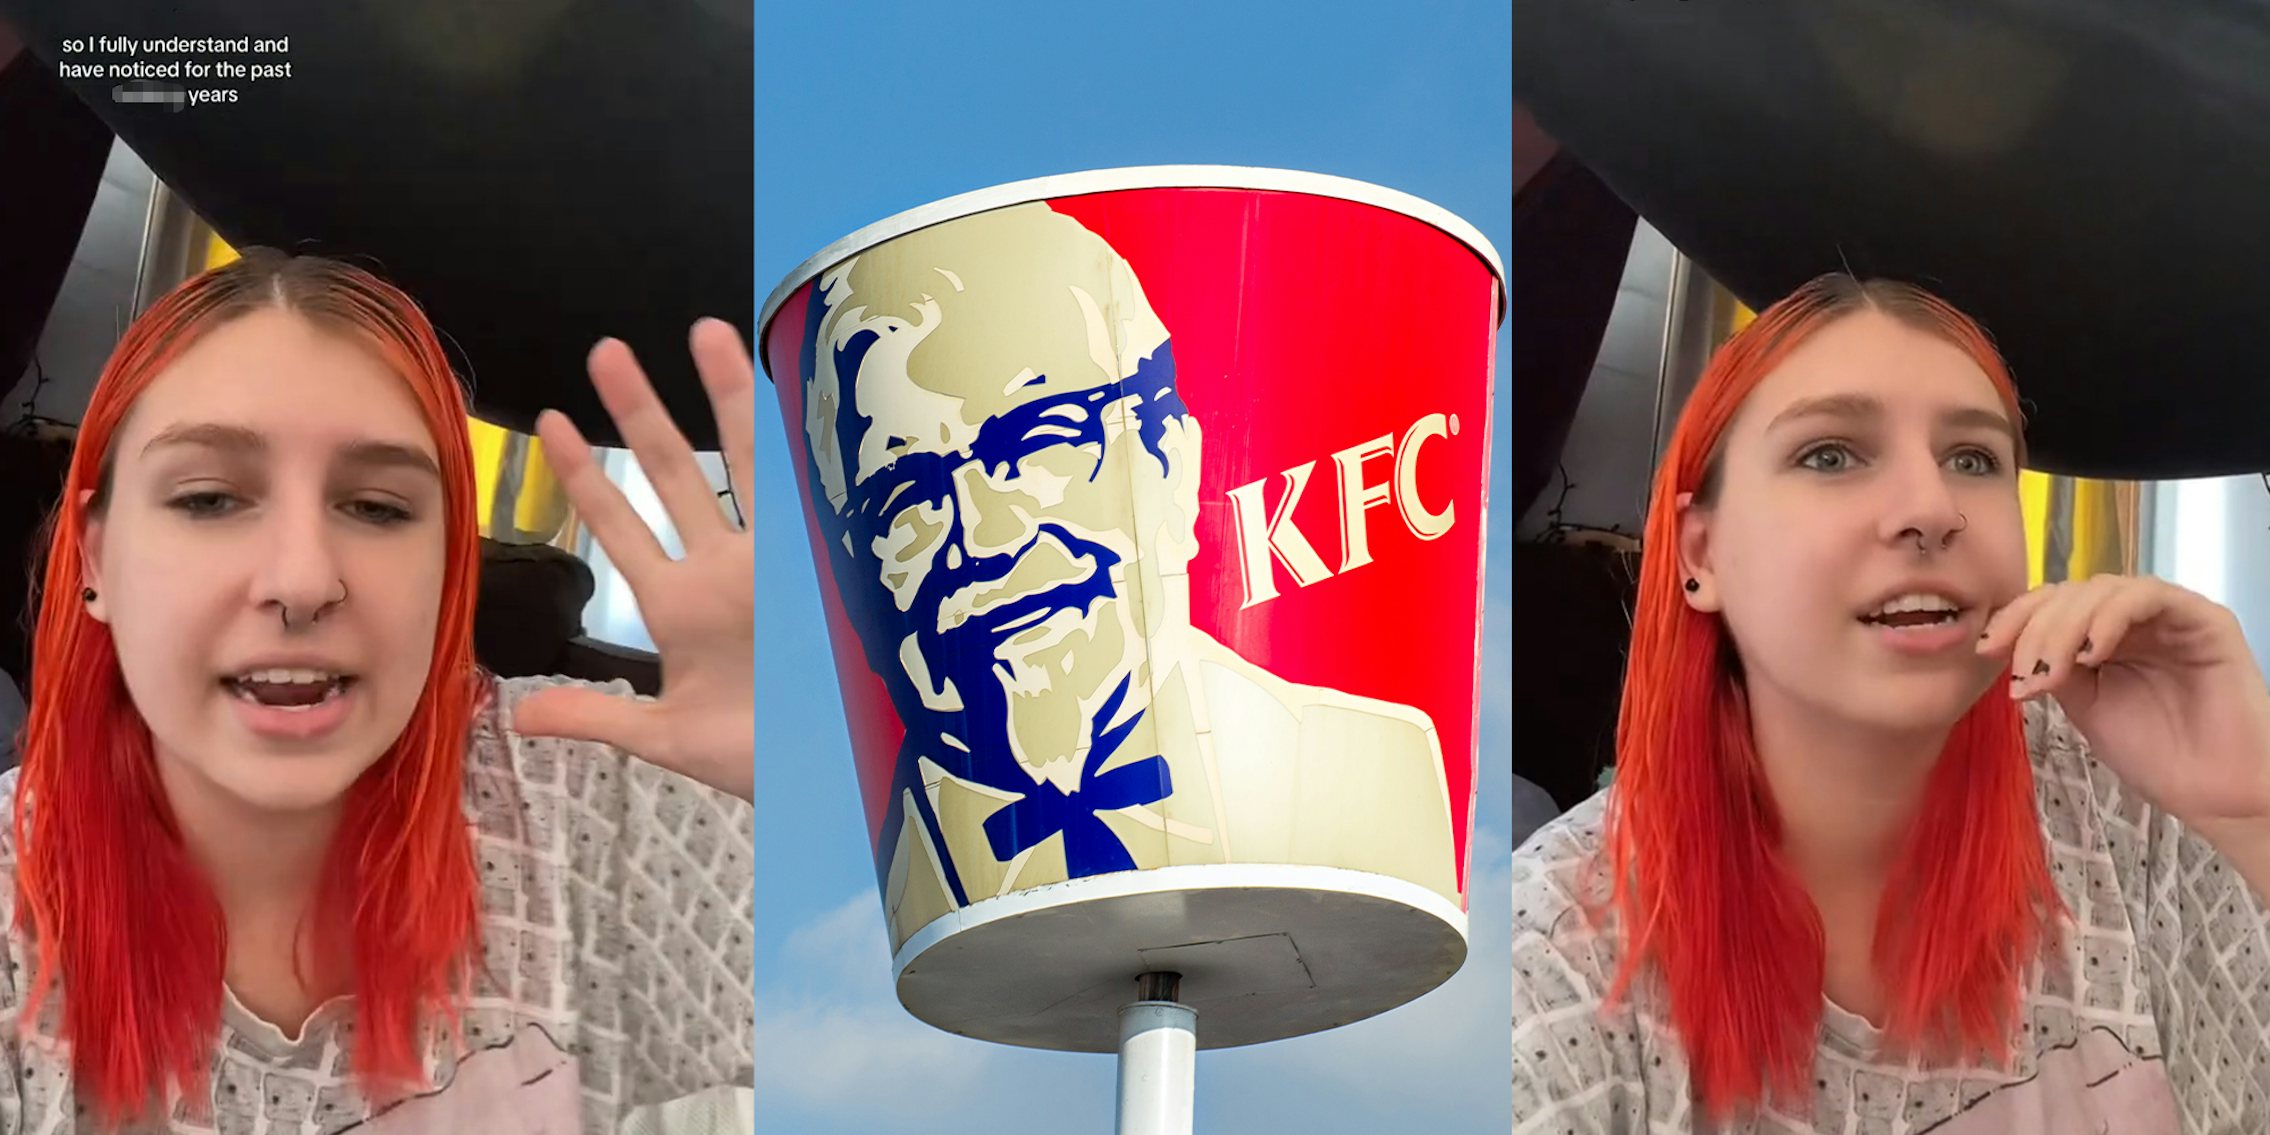 Customer slams price increase of KFC's Famous Bowl and 8-piece meal